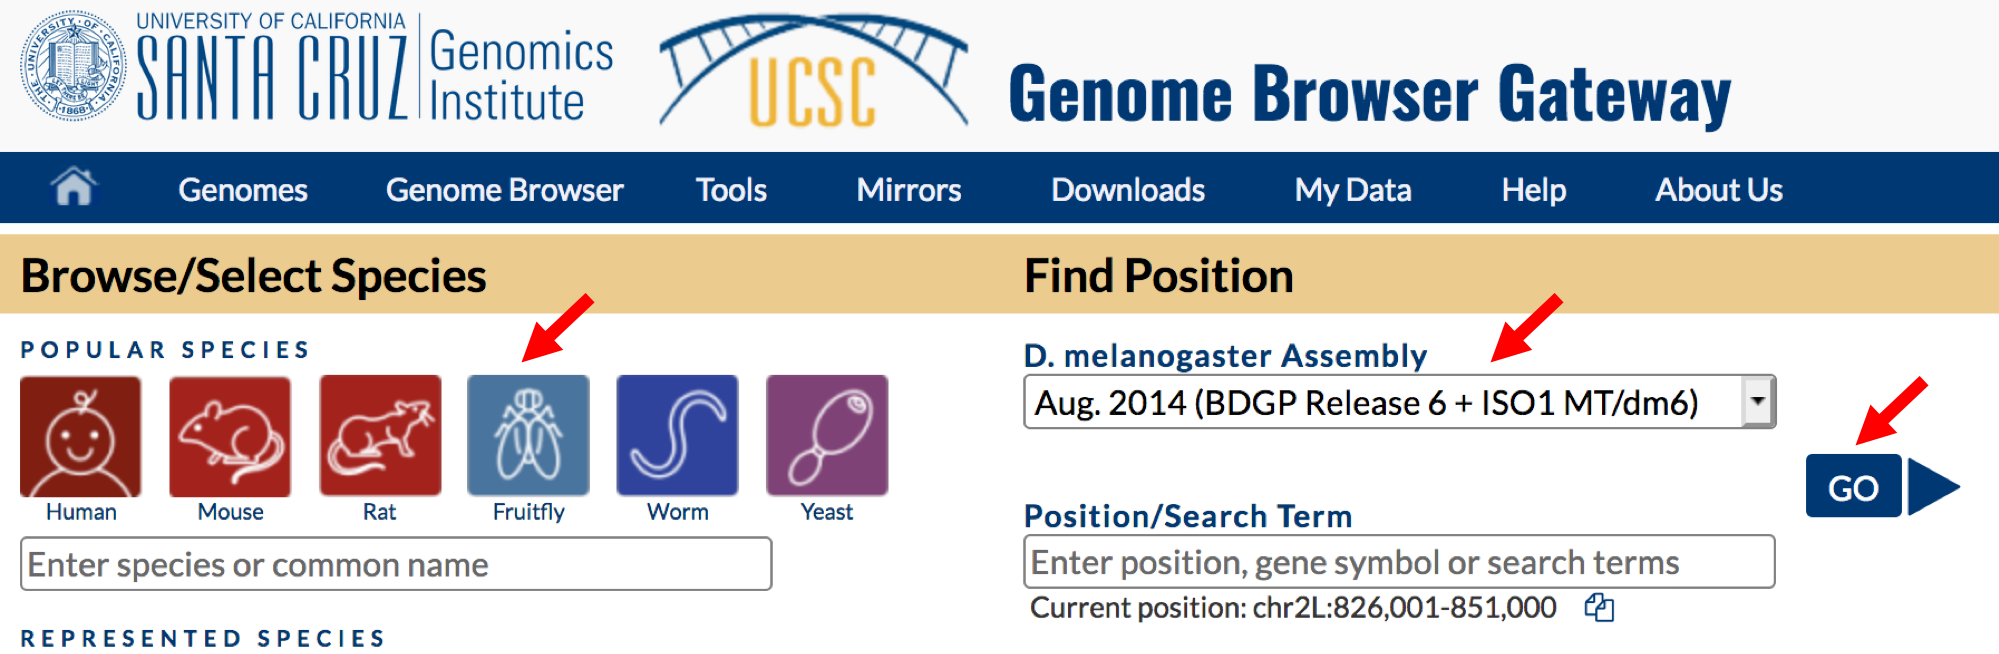 GEP UCSC Genome Browser Gateway page